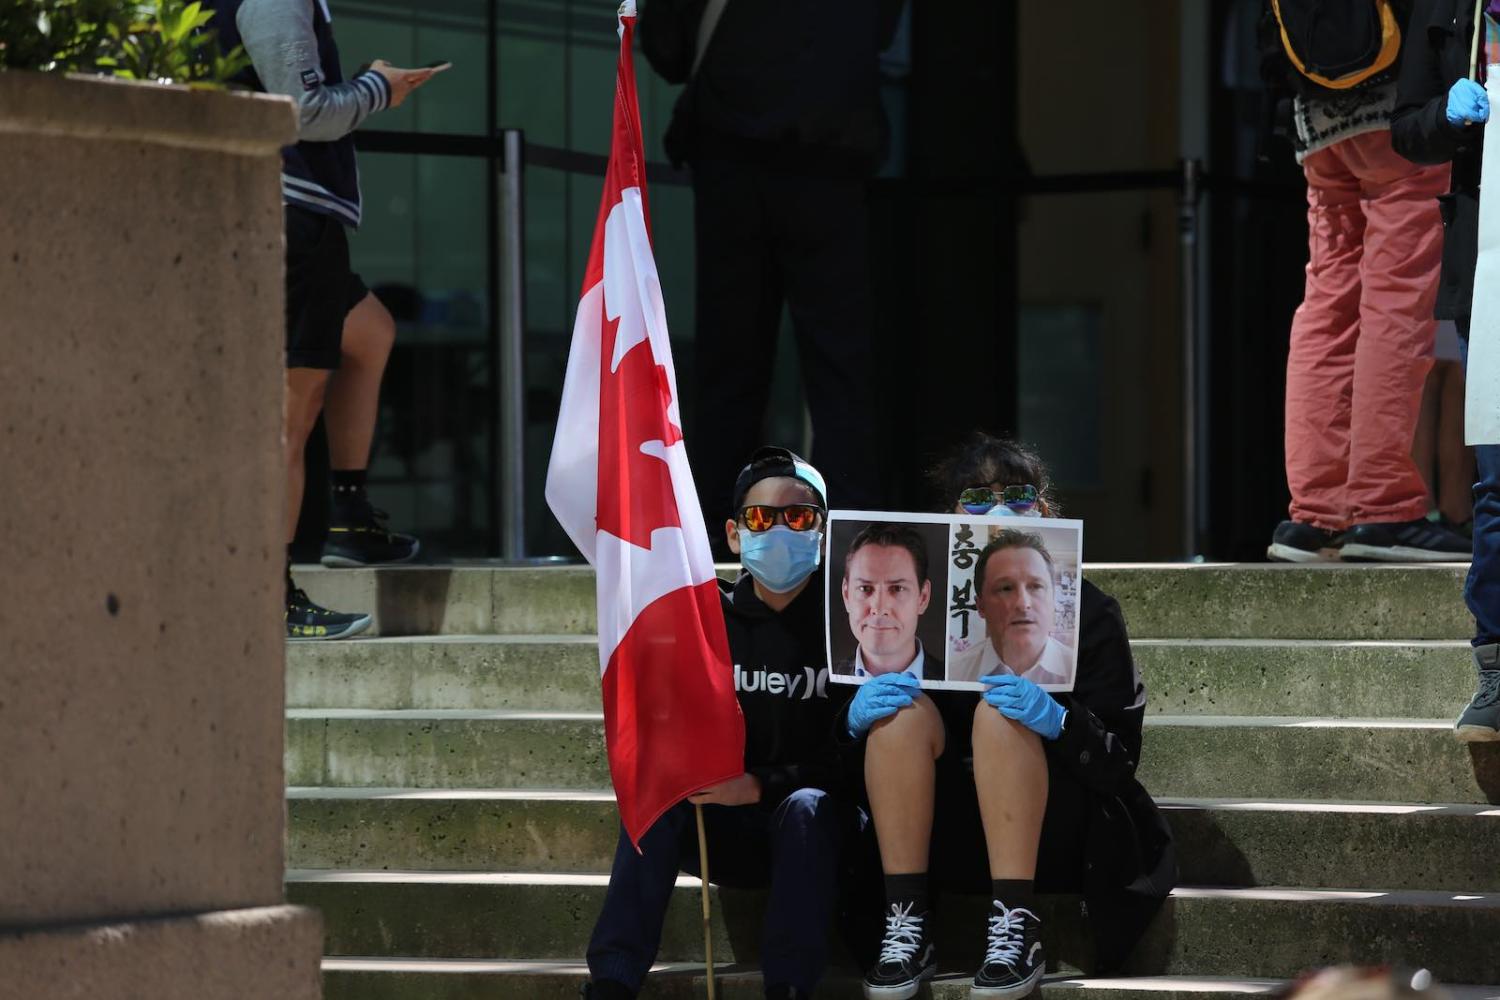 Protesters outside a court hearing for Meng Wanzou hold pictures of Michael Kovrig and Michael Spavor, Vancouver, Canada, 27 May 2020 (Mert Alper Dervis/Anadolu Agency via Getty Images)